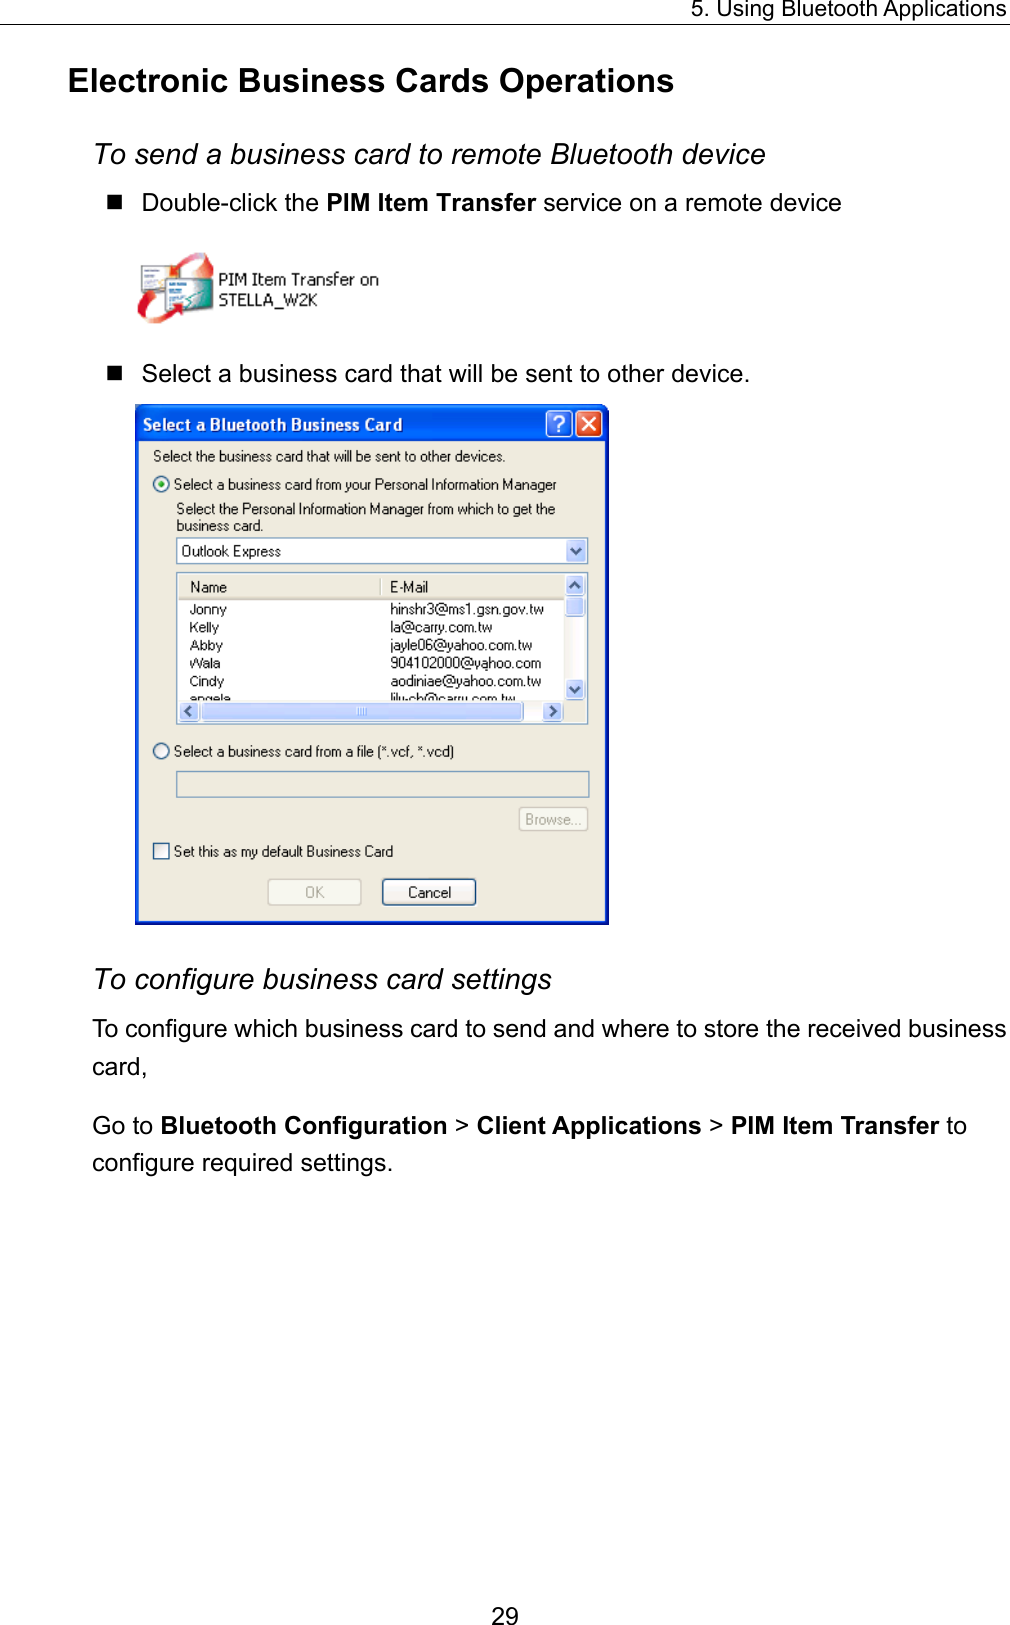 5. Using Bluetooth Applications 29 Electronic Business Cards Operations To send a business card to remote Bluetooth device  Double-click the PIM Item Transfer service on a remote device   Select a business card that will be sent to other device.    To configure business card settings To configure which business card to send and where to store the received business card,  Go to Bluetooth Configuration &gt; Client Applications &gt; PIM Item Transfer to configure required settings. 